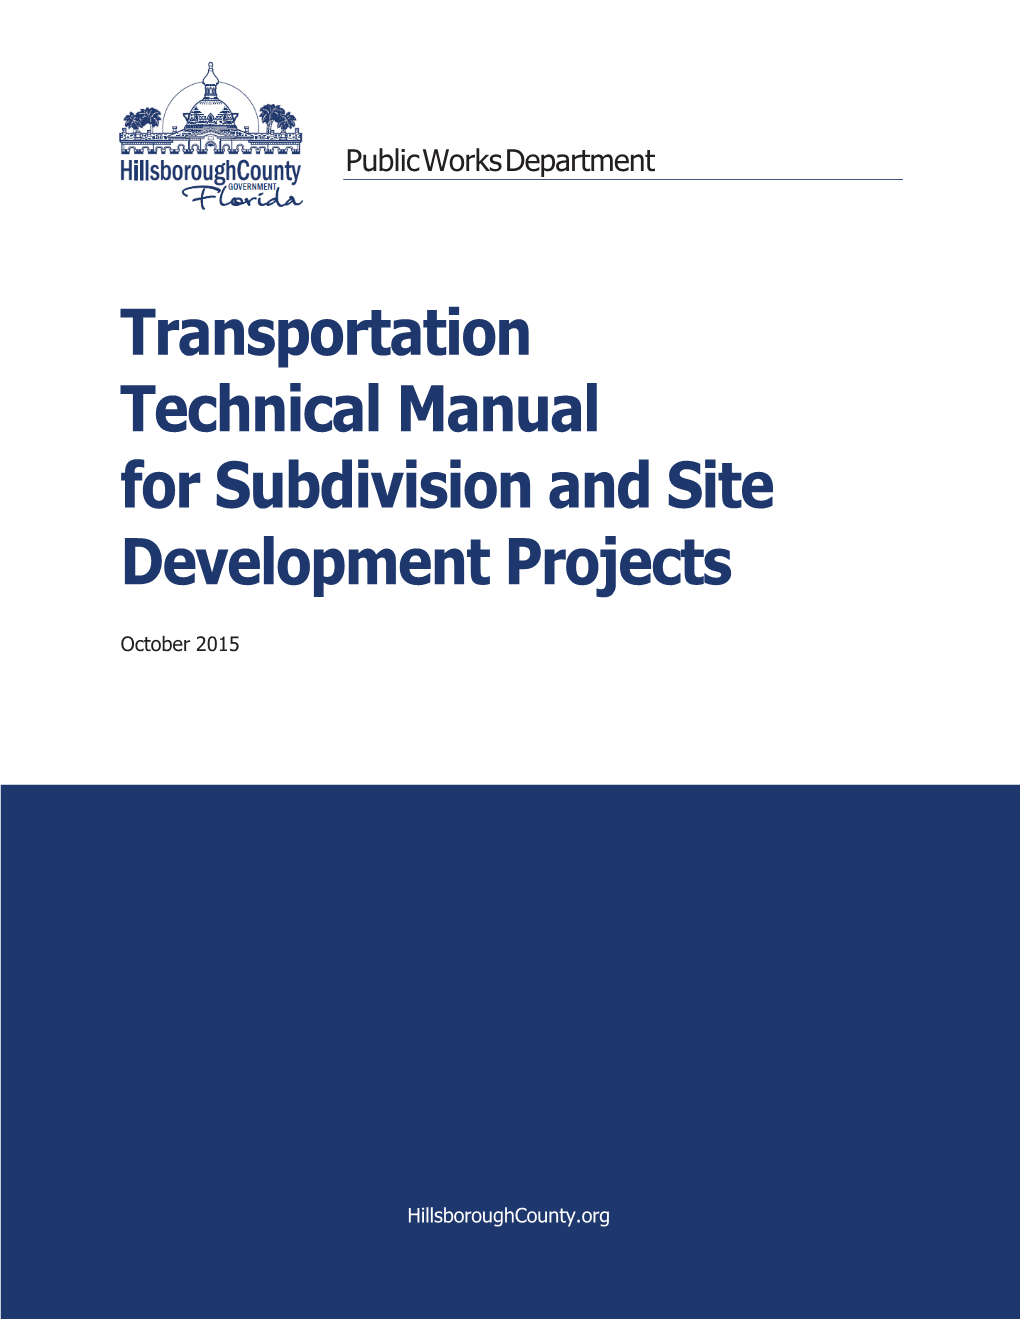 Transportation Technical Manual for Subdivision and Site Development Projects